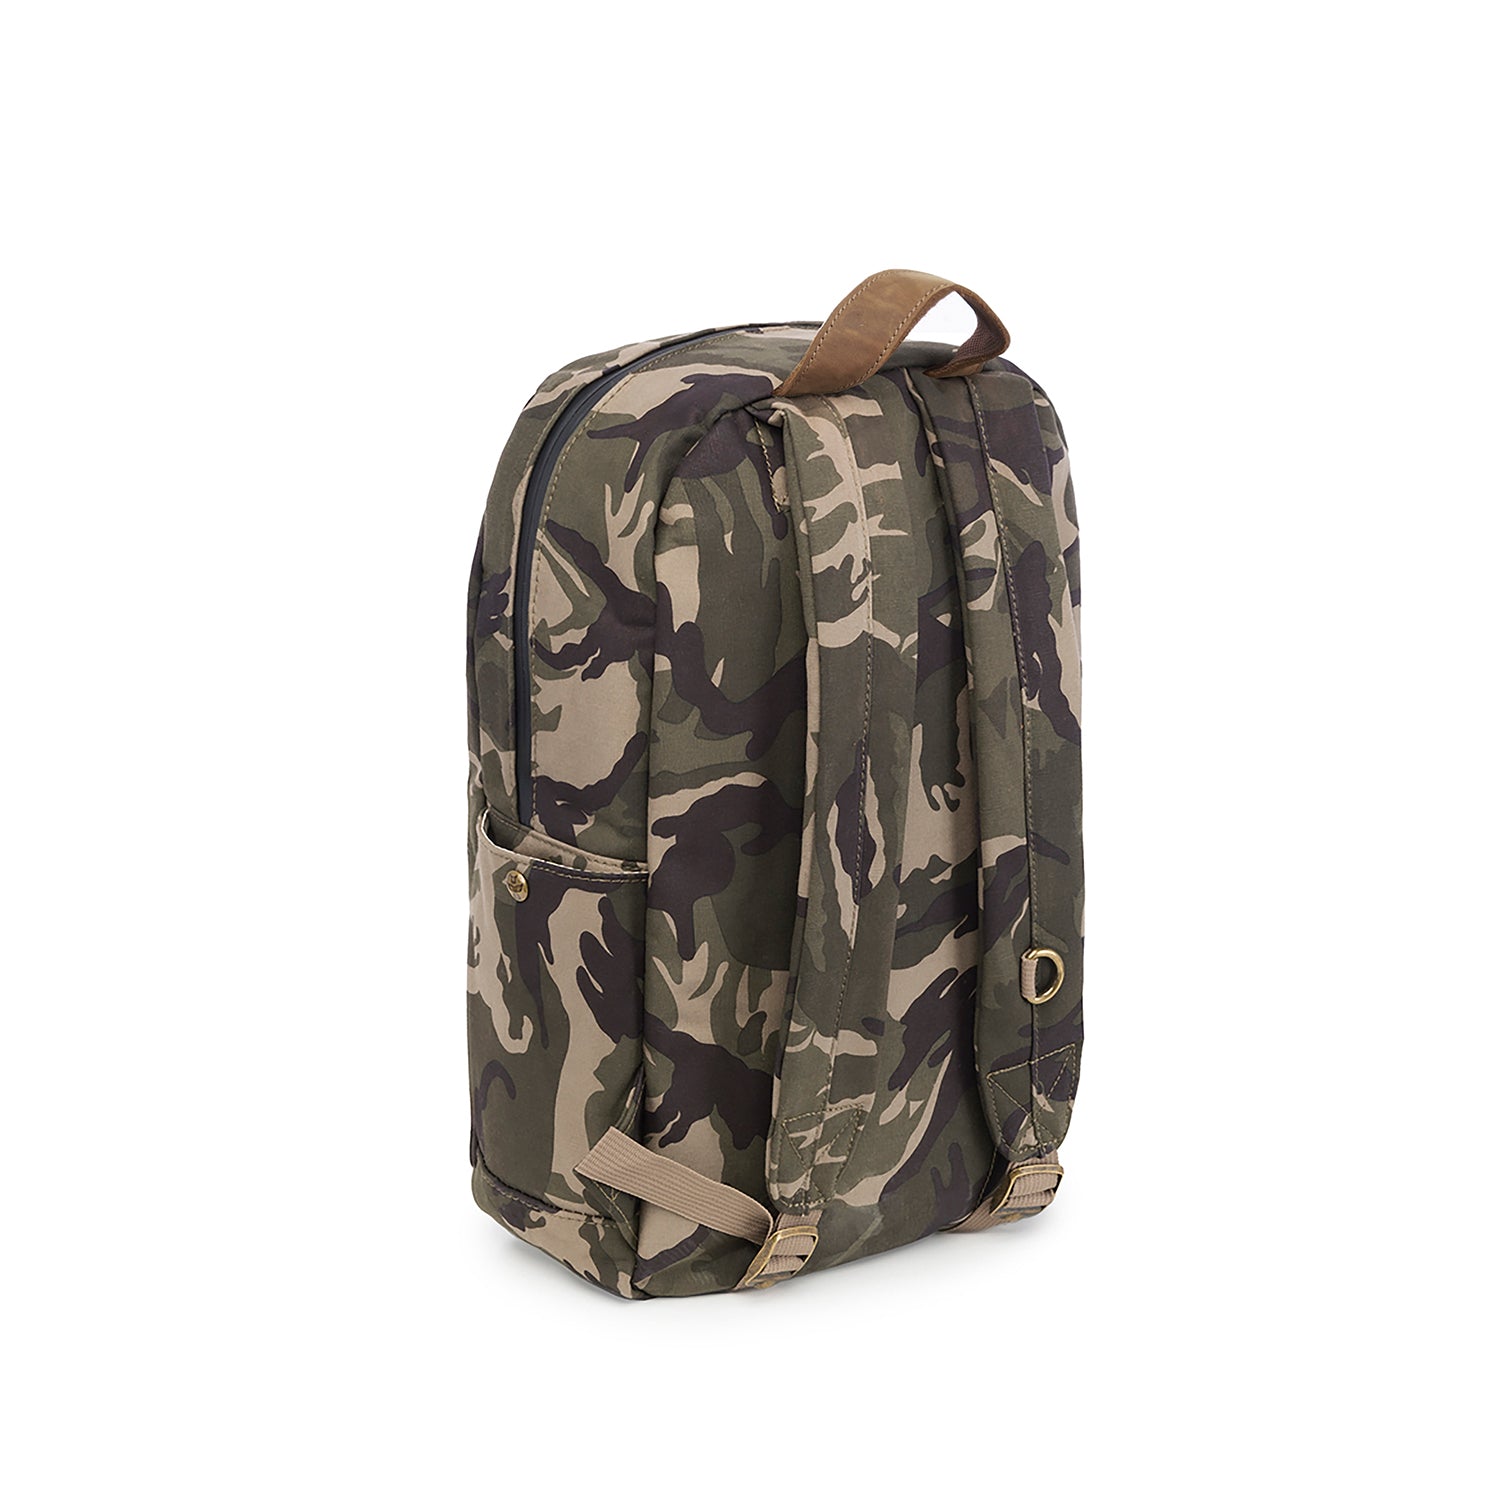 Camo Brown Canvas Smell Proof Water Resistant Backpack Bag